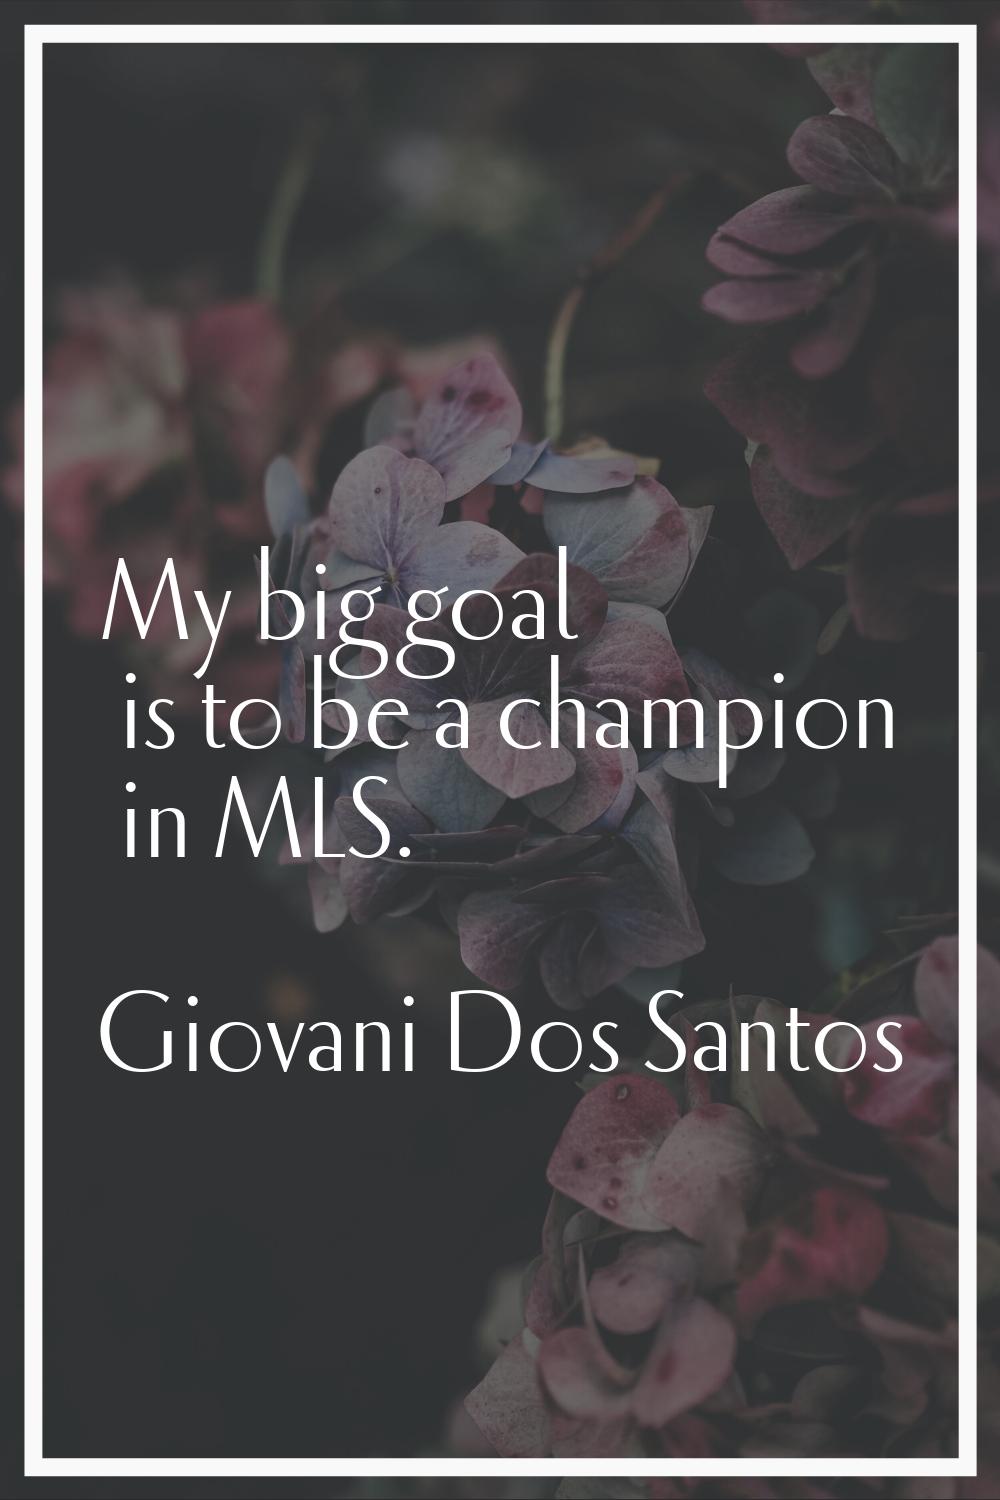 My big goal is to be a champion in MLS.